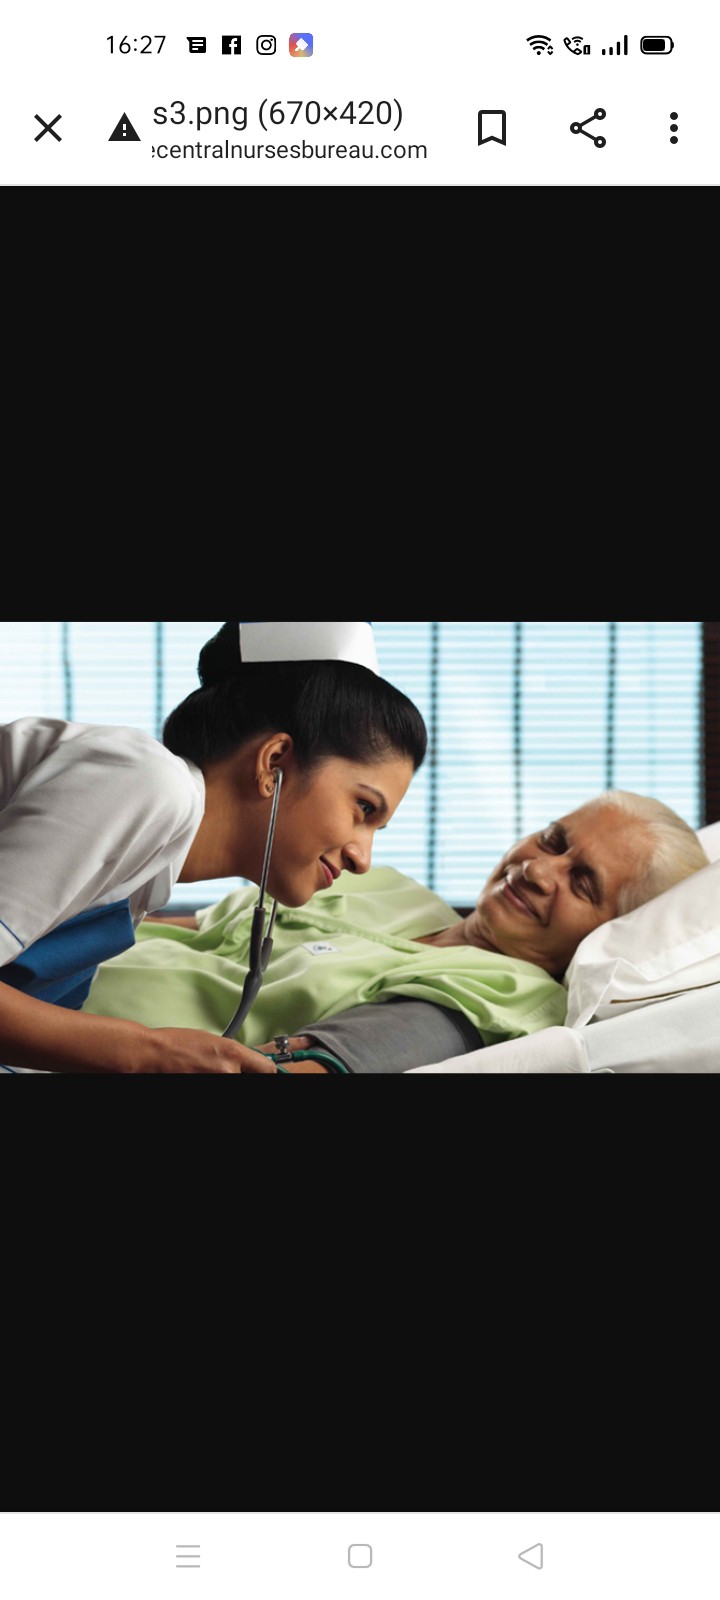 swaraj home care services.. in पुणे, महाराष्ट्र 411028 - Free Business Listing